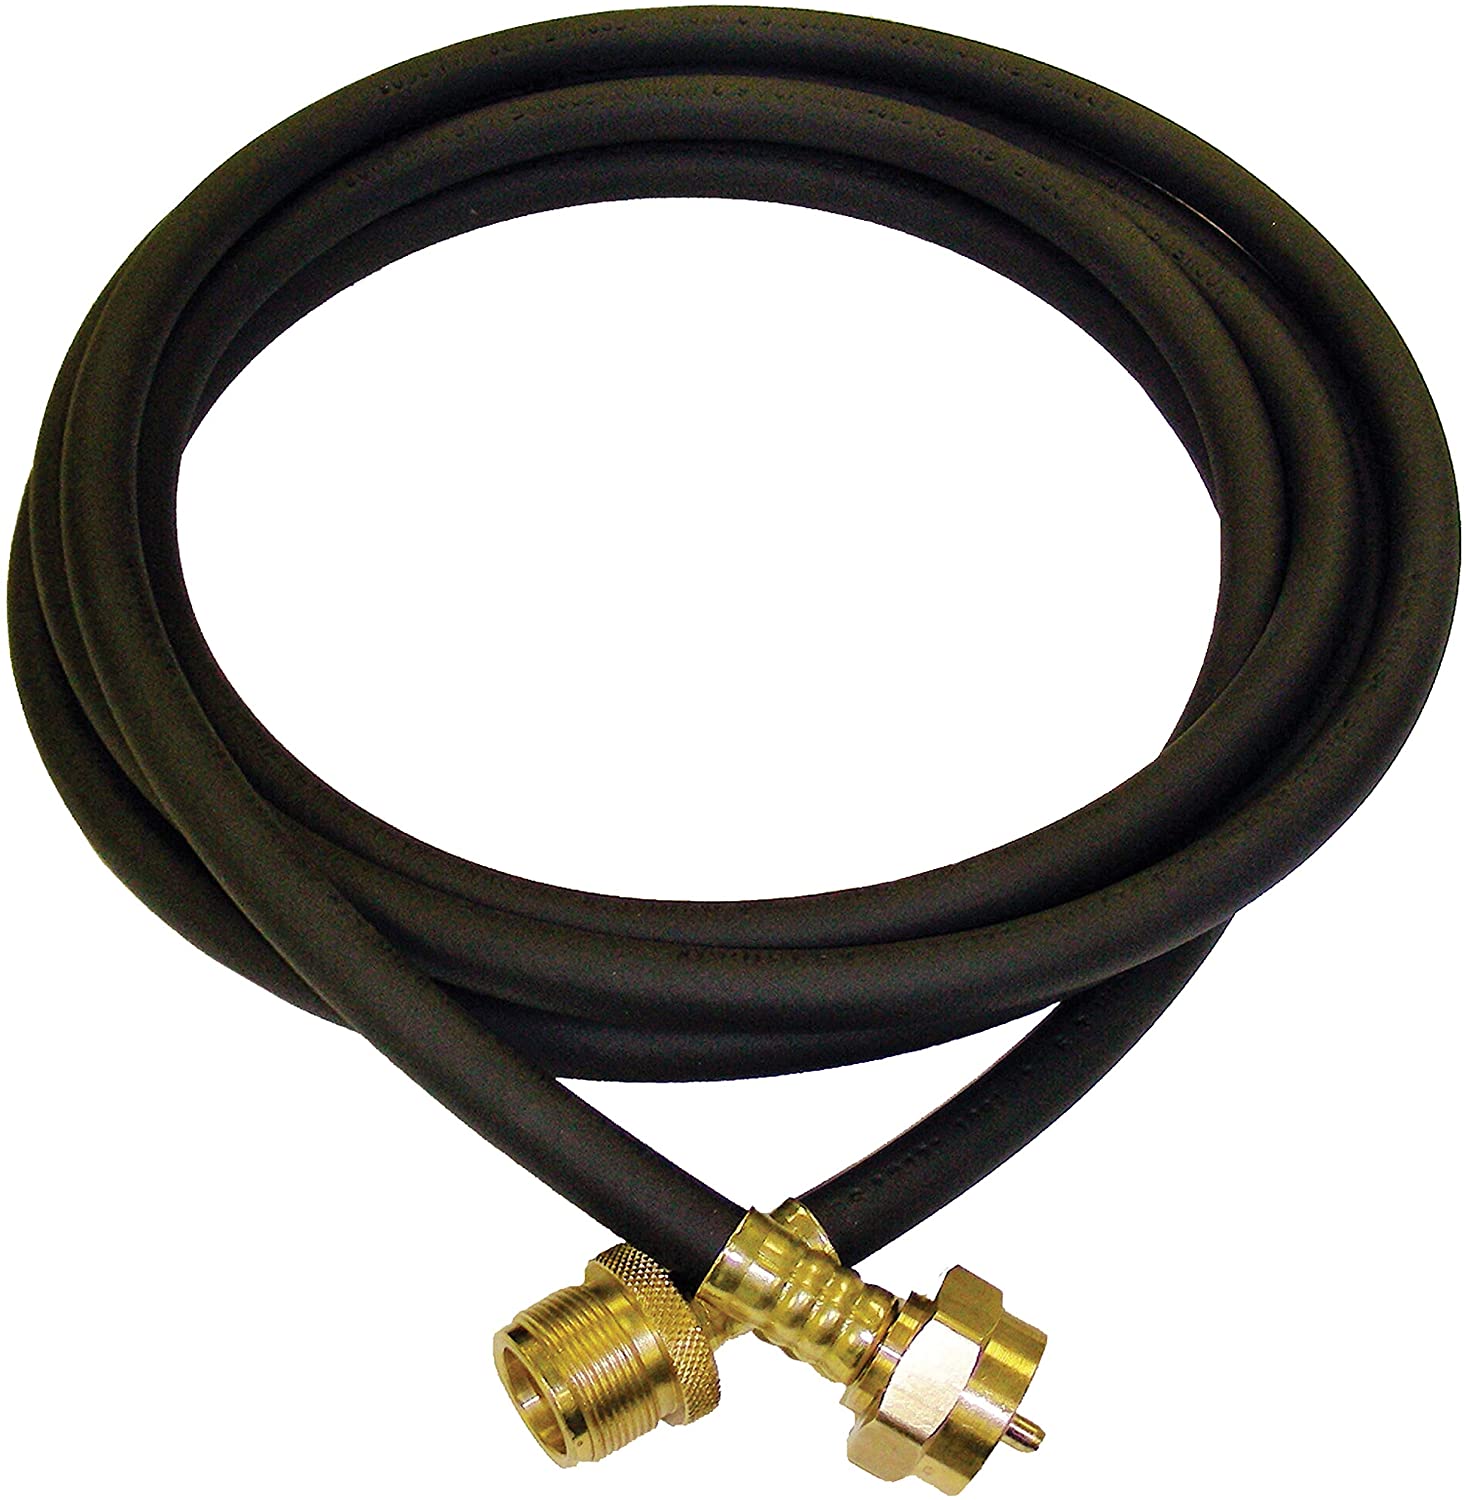 Marshall Excelsior MER421-144 12 Foot Extend-A-Flow Propane Hose